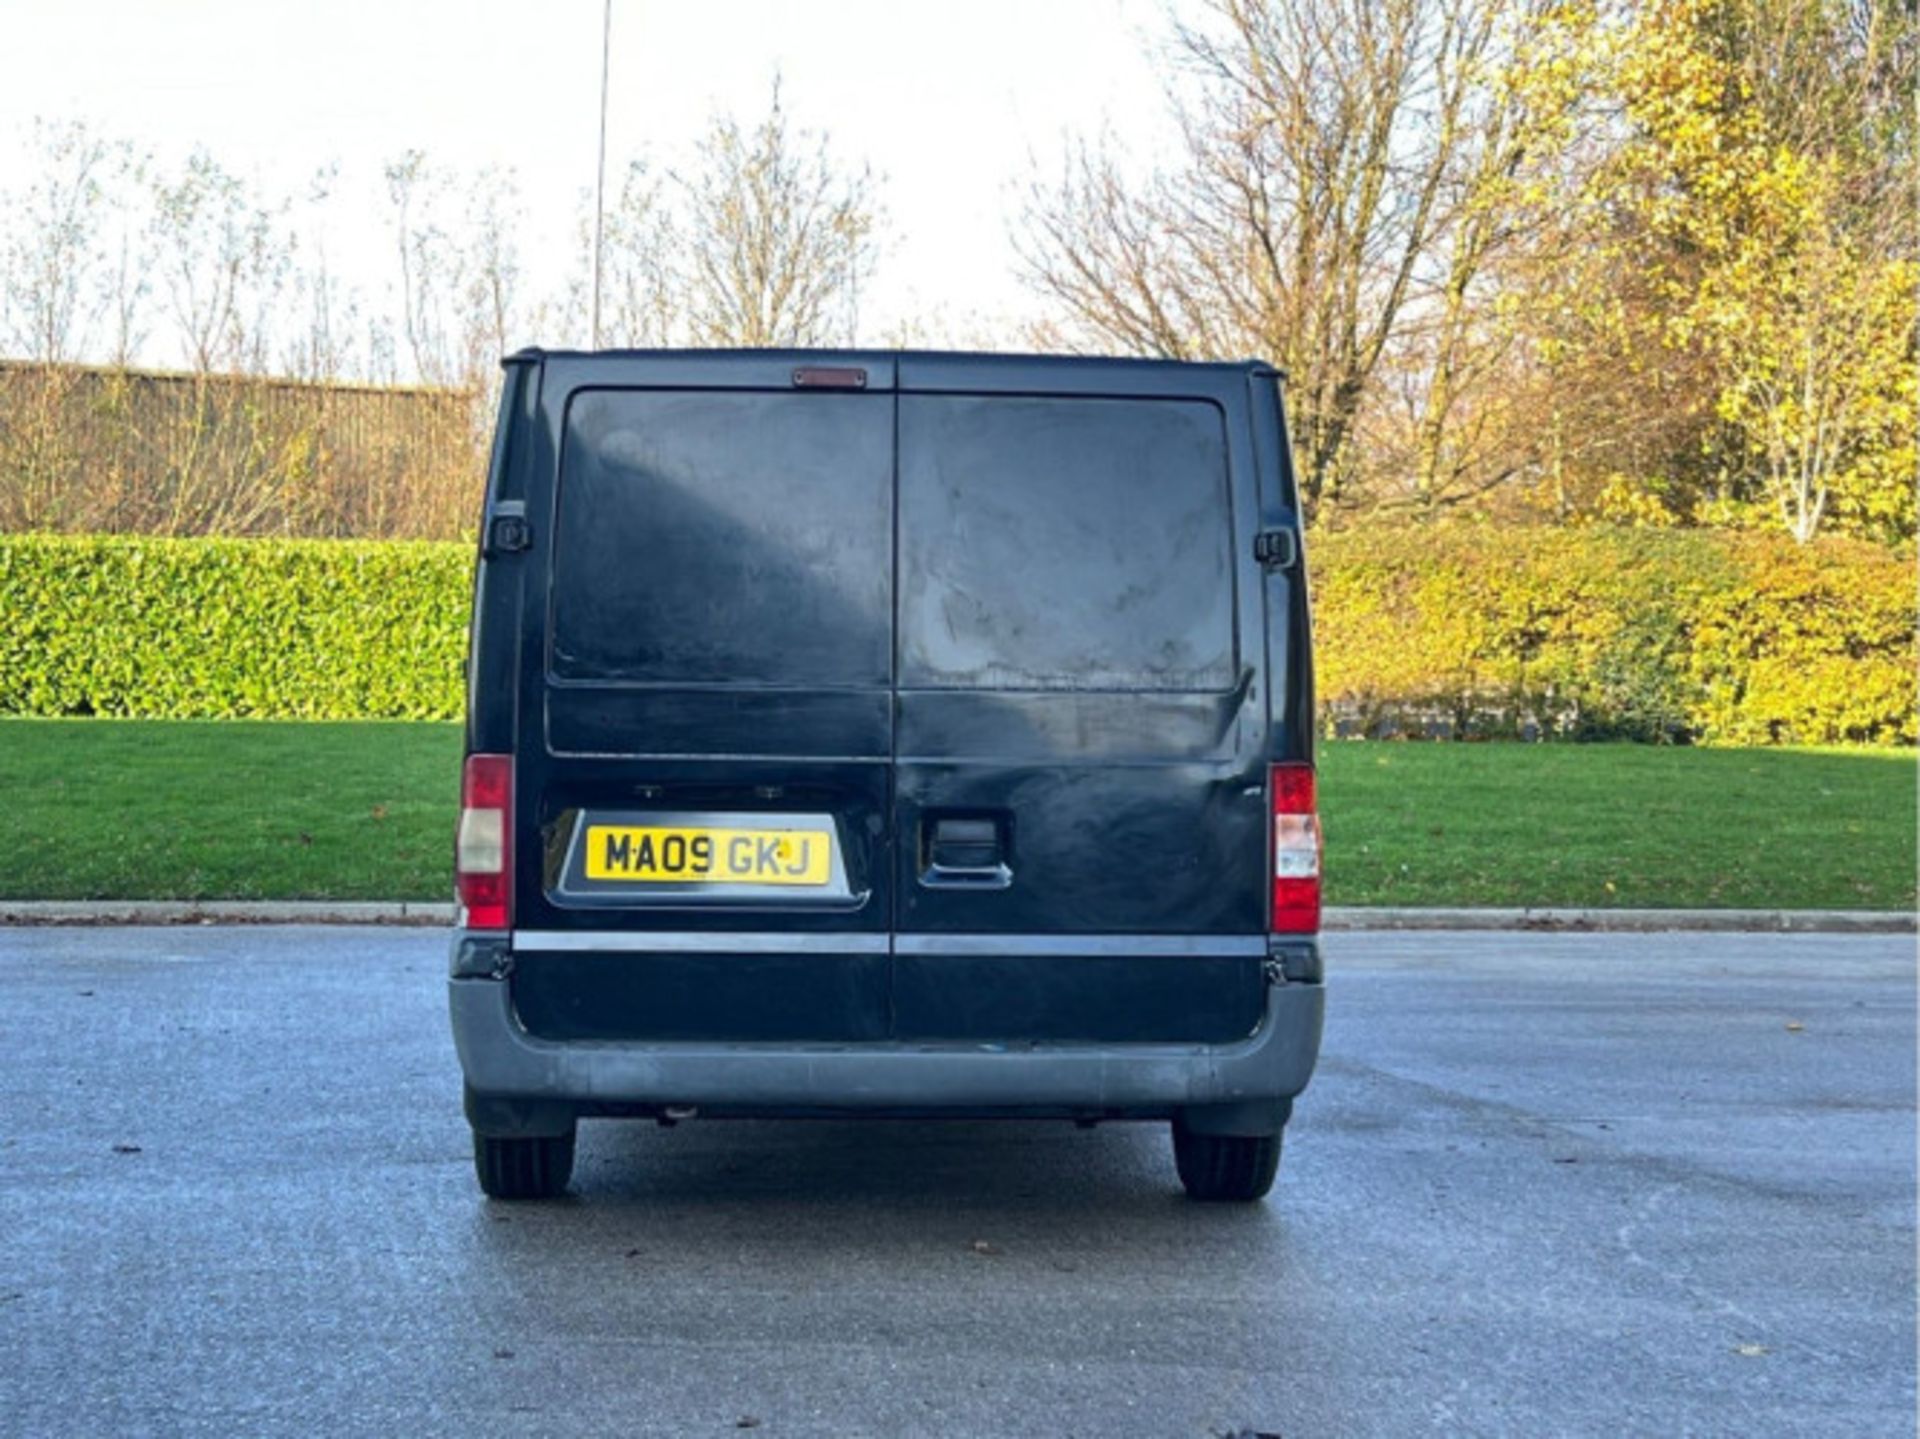 FORD TRANSIT 2.2 TDCI 260 TREND FWD L1 H1 5DR (2010) - Image 5 of 53